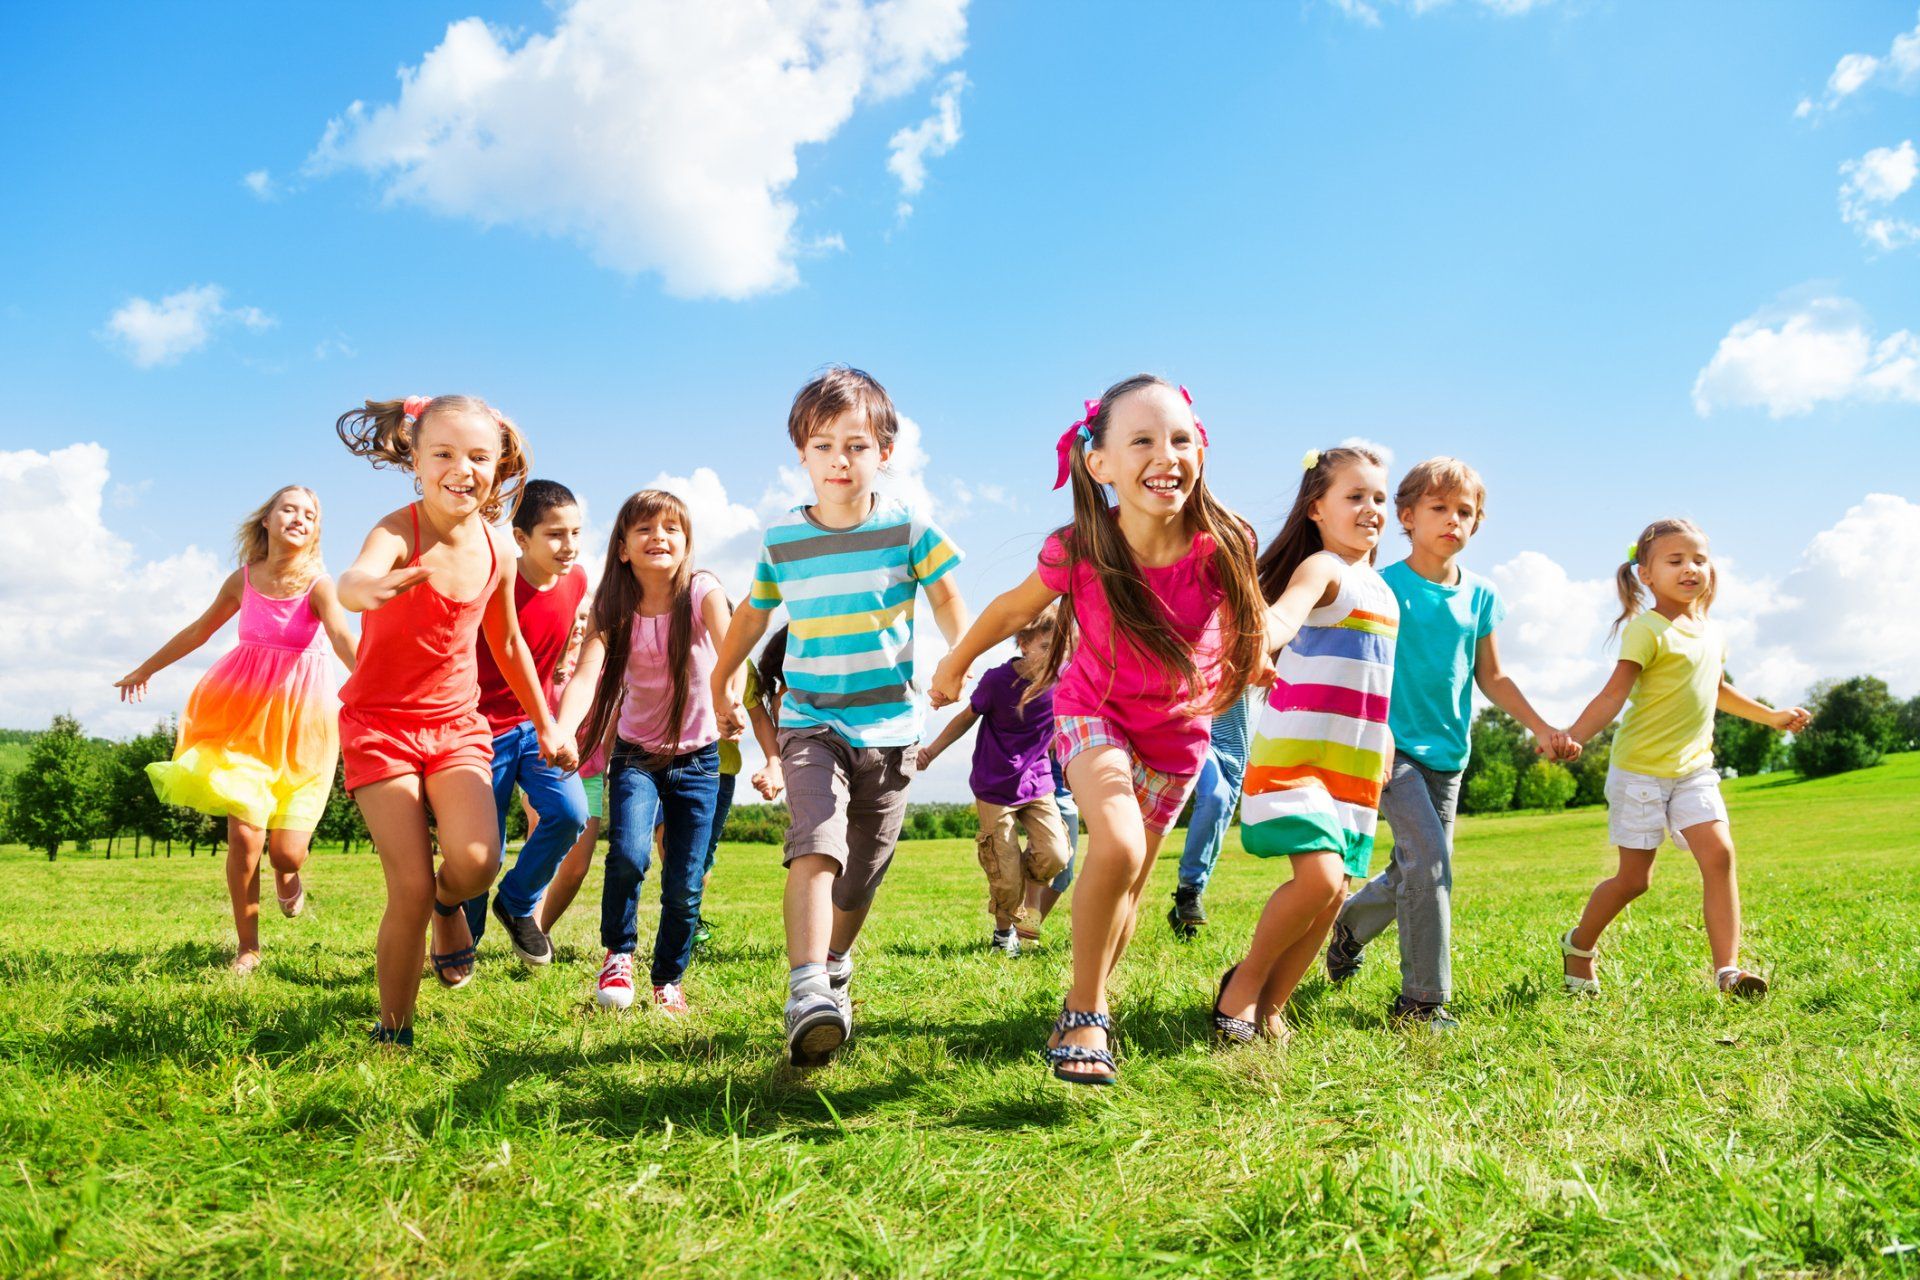 Montessori Admissions — Group Of Kids Running Over Grass On A Sunny Day in Glenshaw, PA